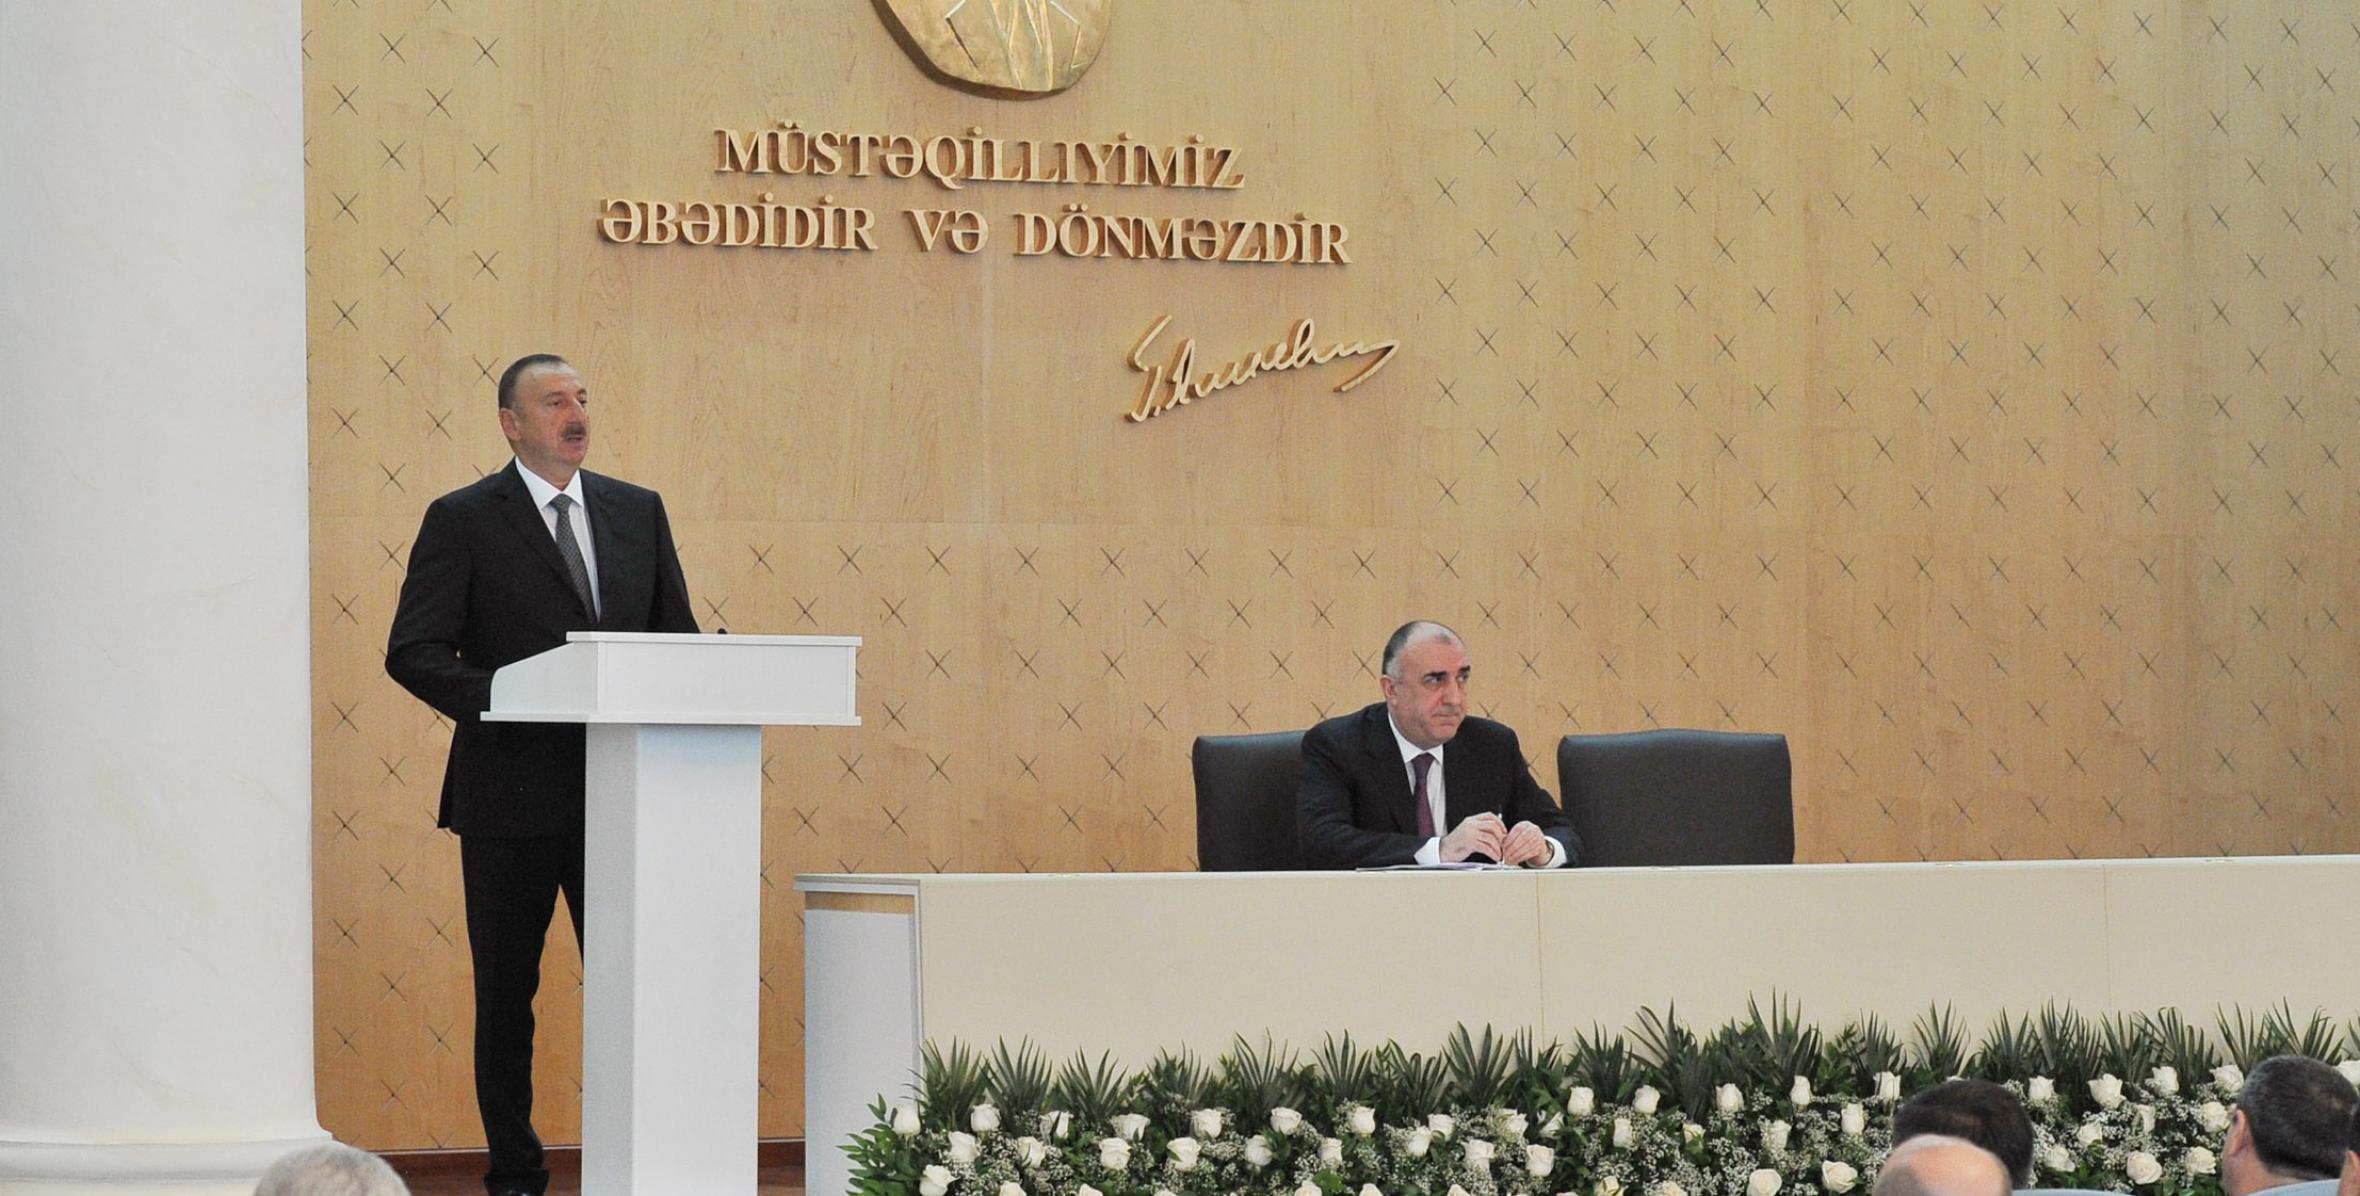 Speech by Ilham Aliyev at the 5th session of the heads of Azerbaijani diplomatic services